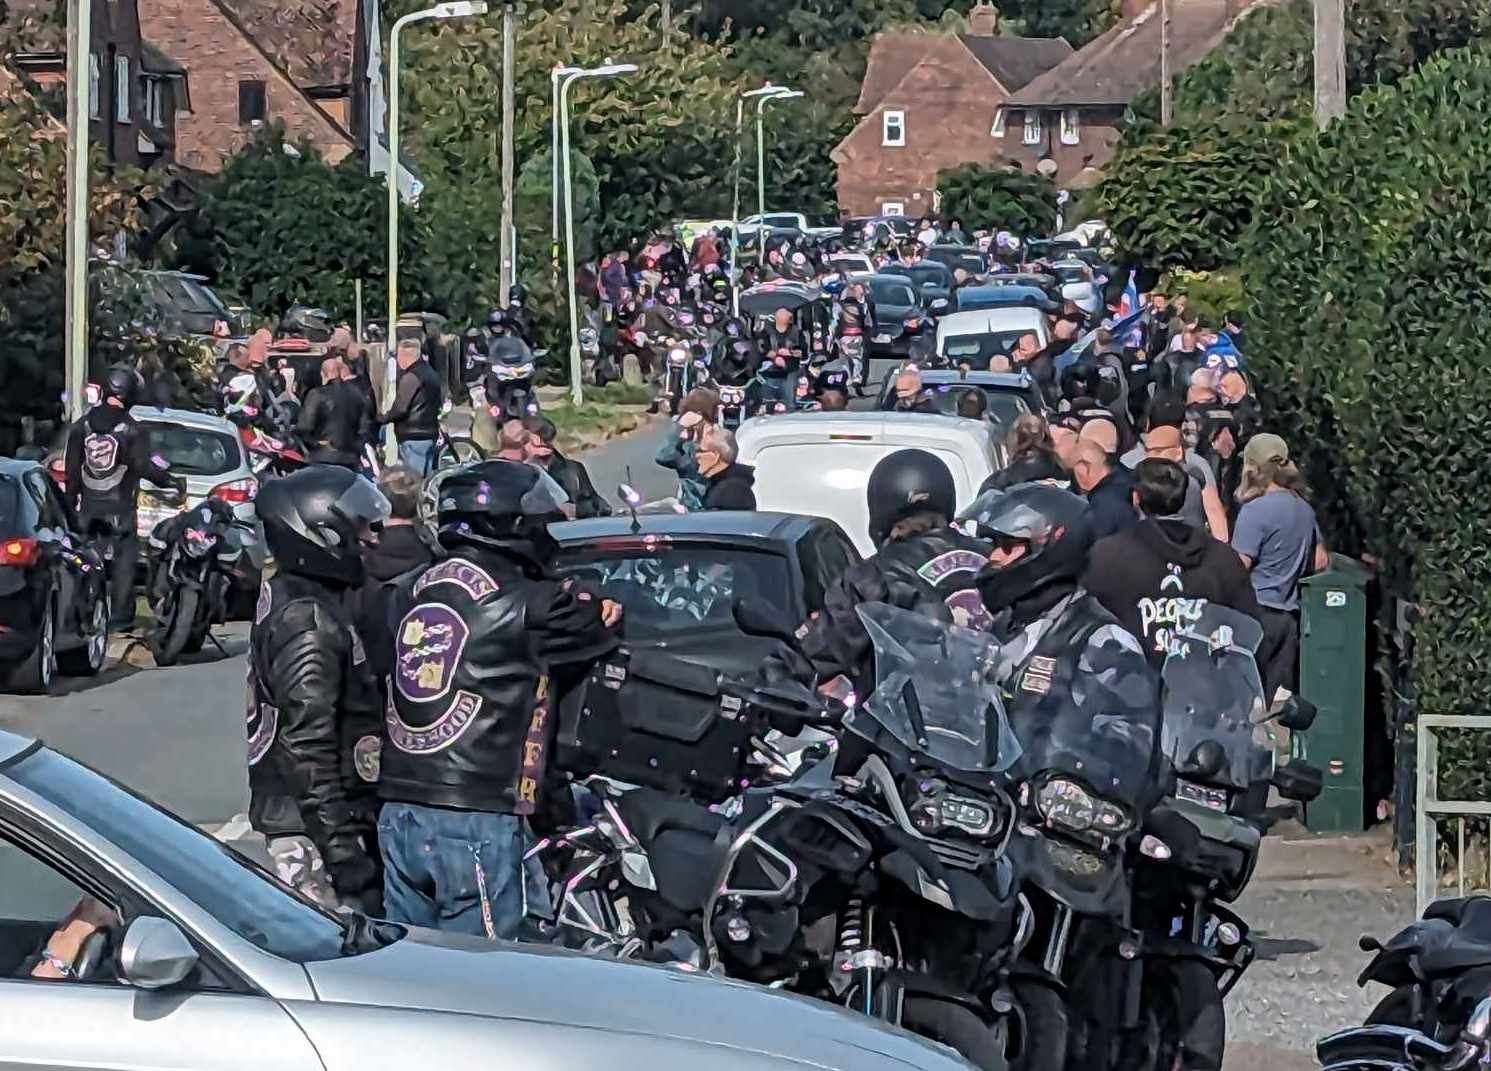 Hundreds of bikers turned up to pay tribute to Mr Clarke